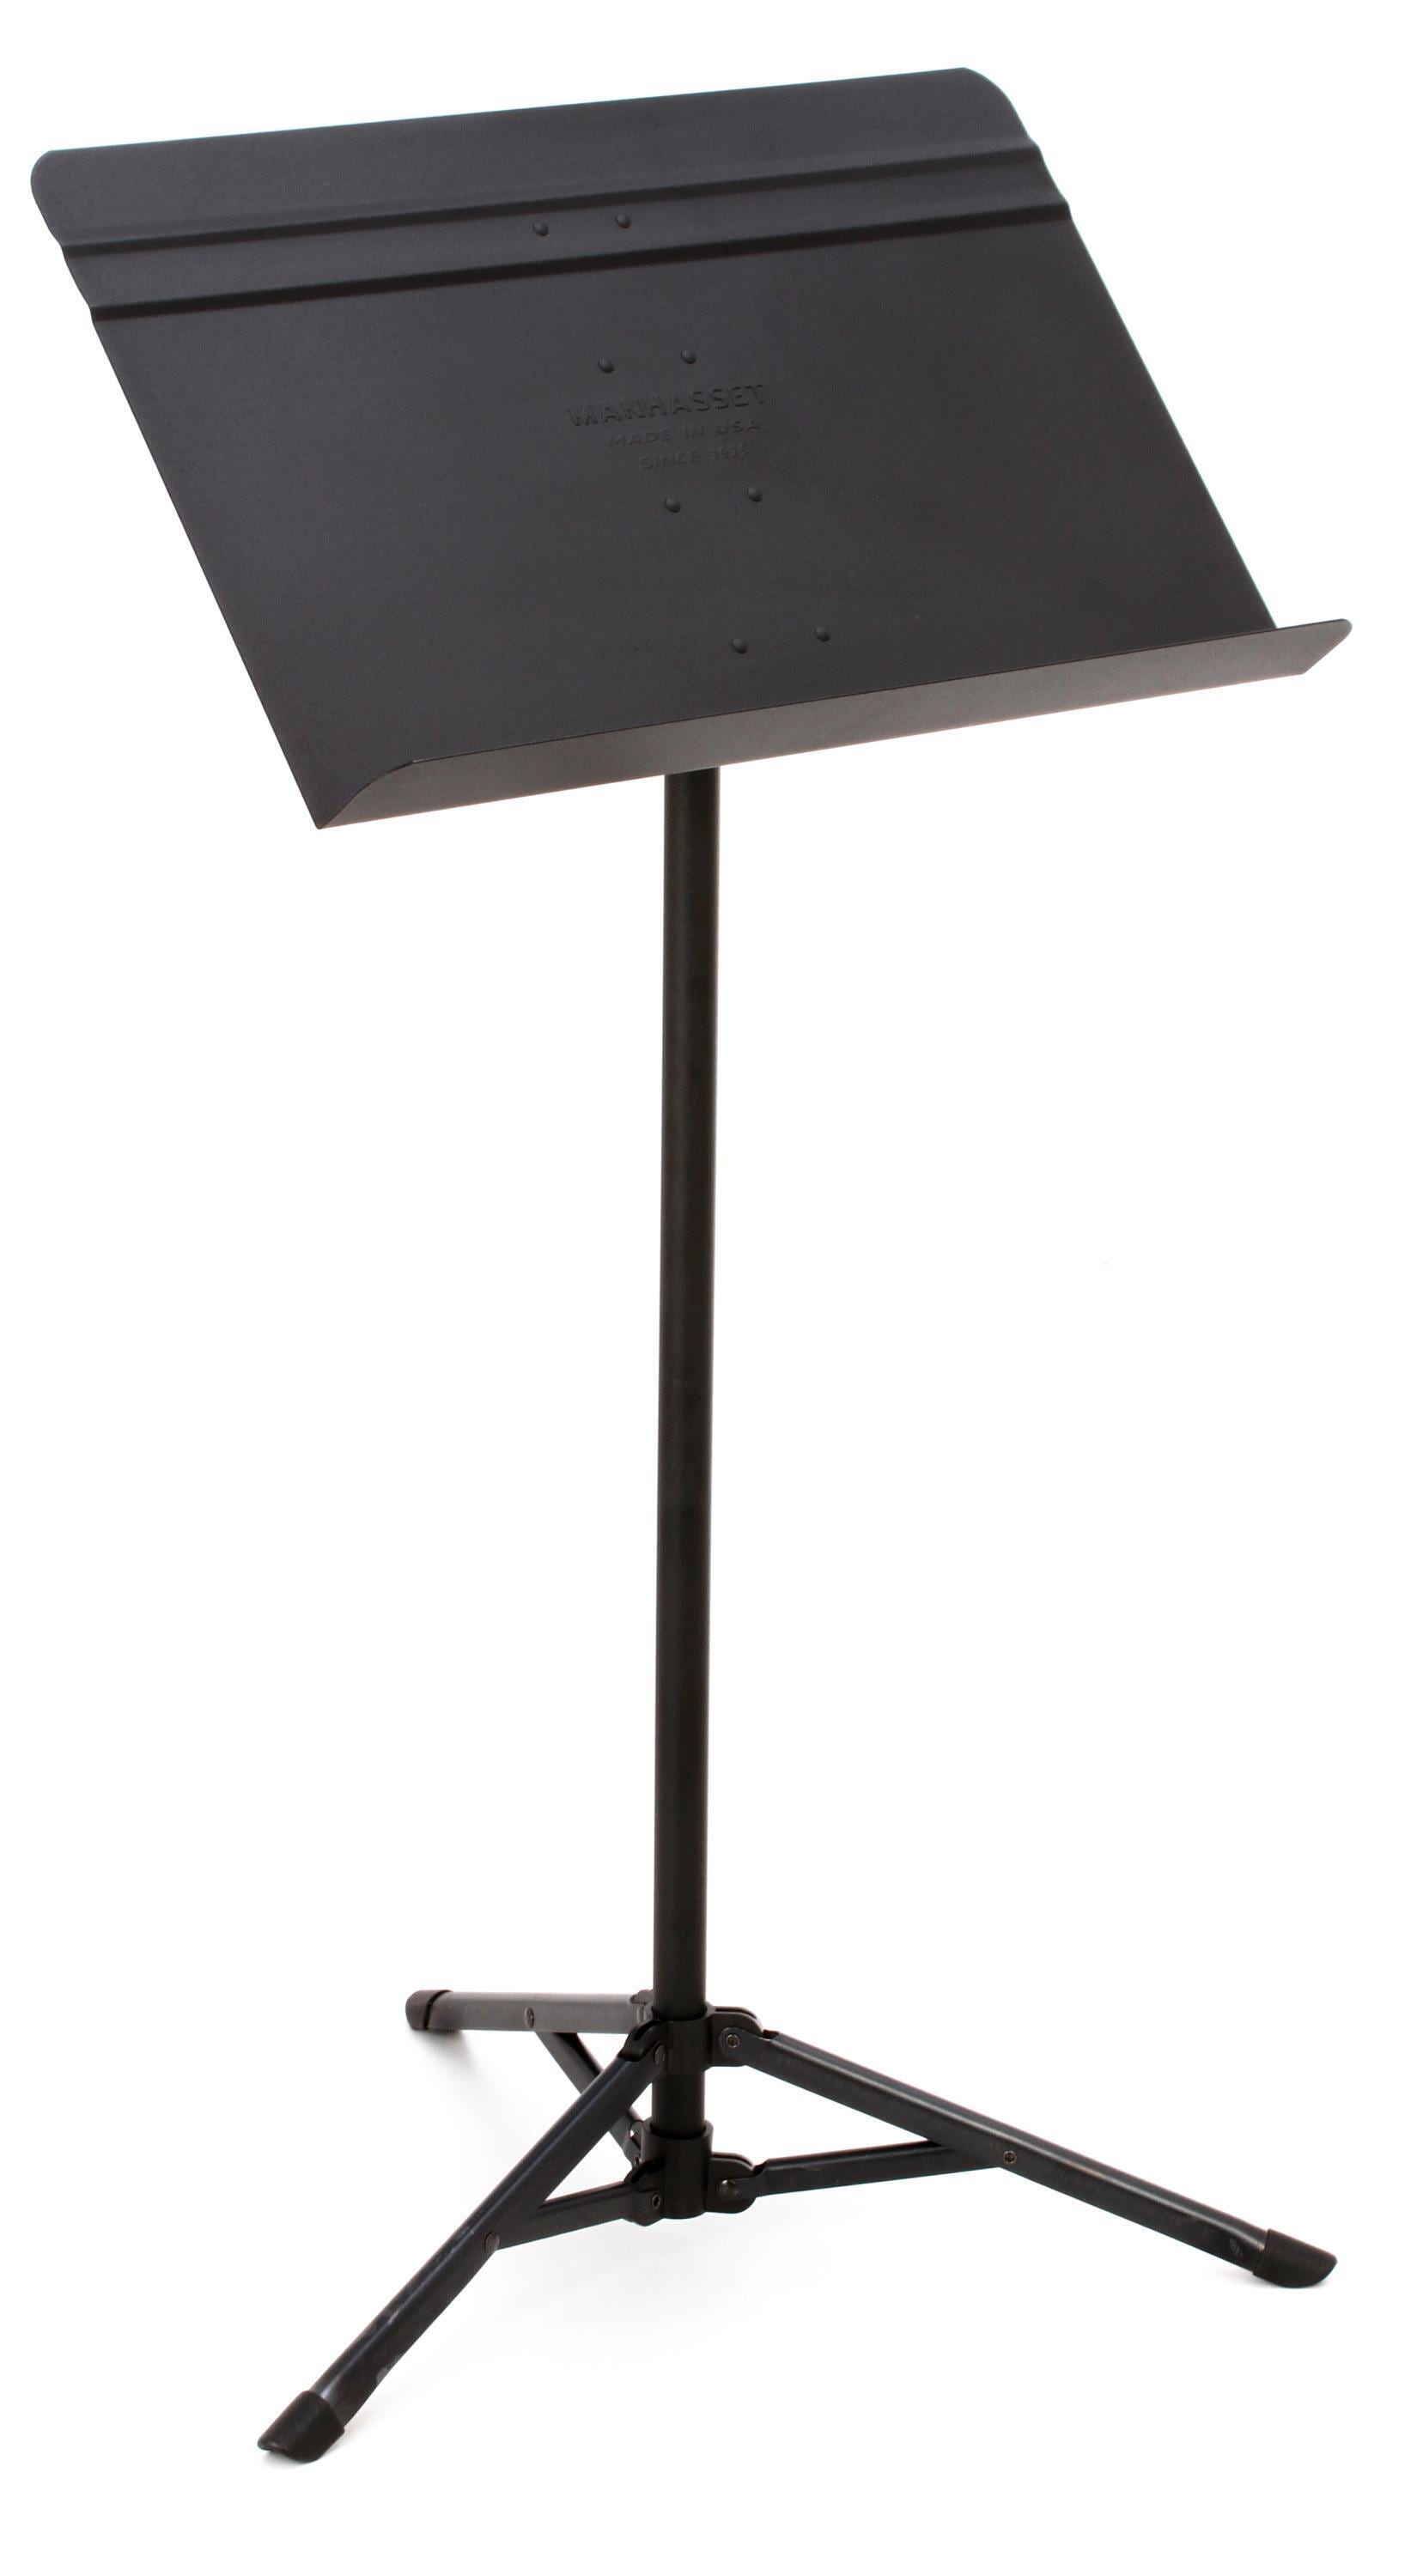 Manhasset Model 52 Voyager Music Stand | Sweetwater